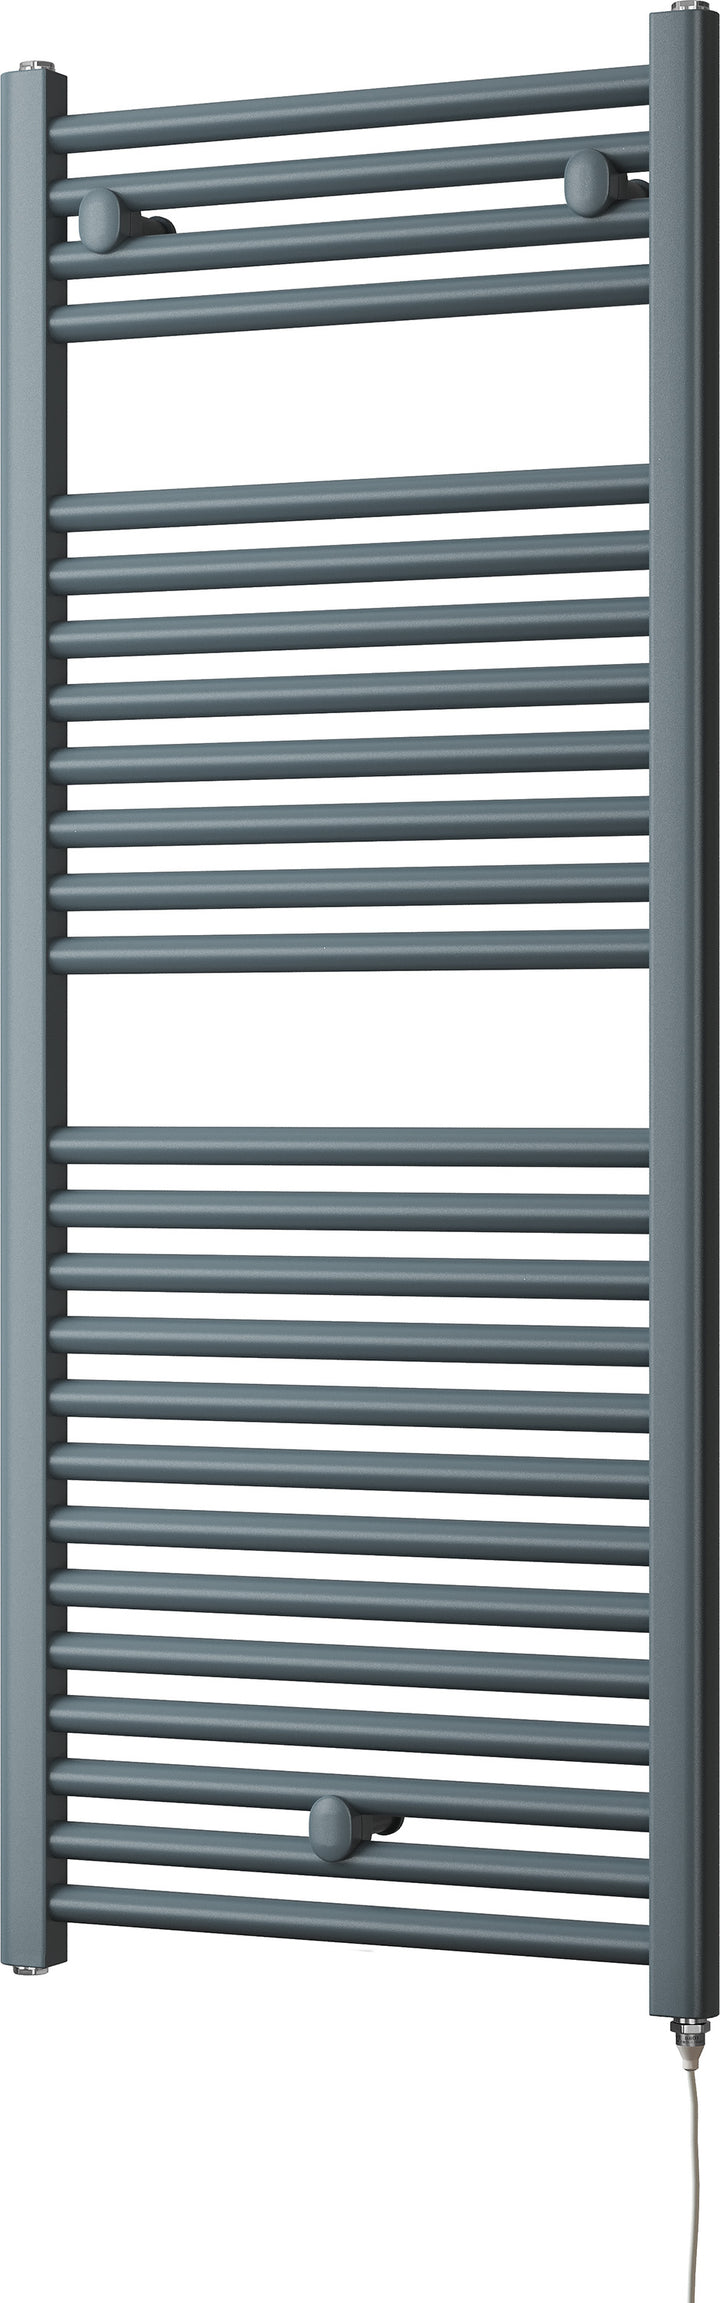 Roma - Anthracite Electric Towel Rail H1230mm x W500mm Straight 500w Standard